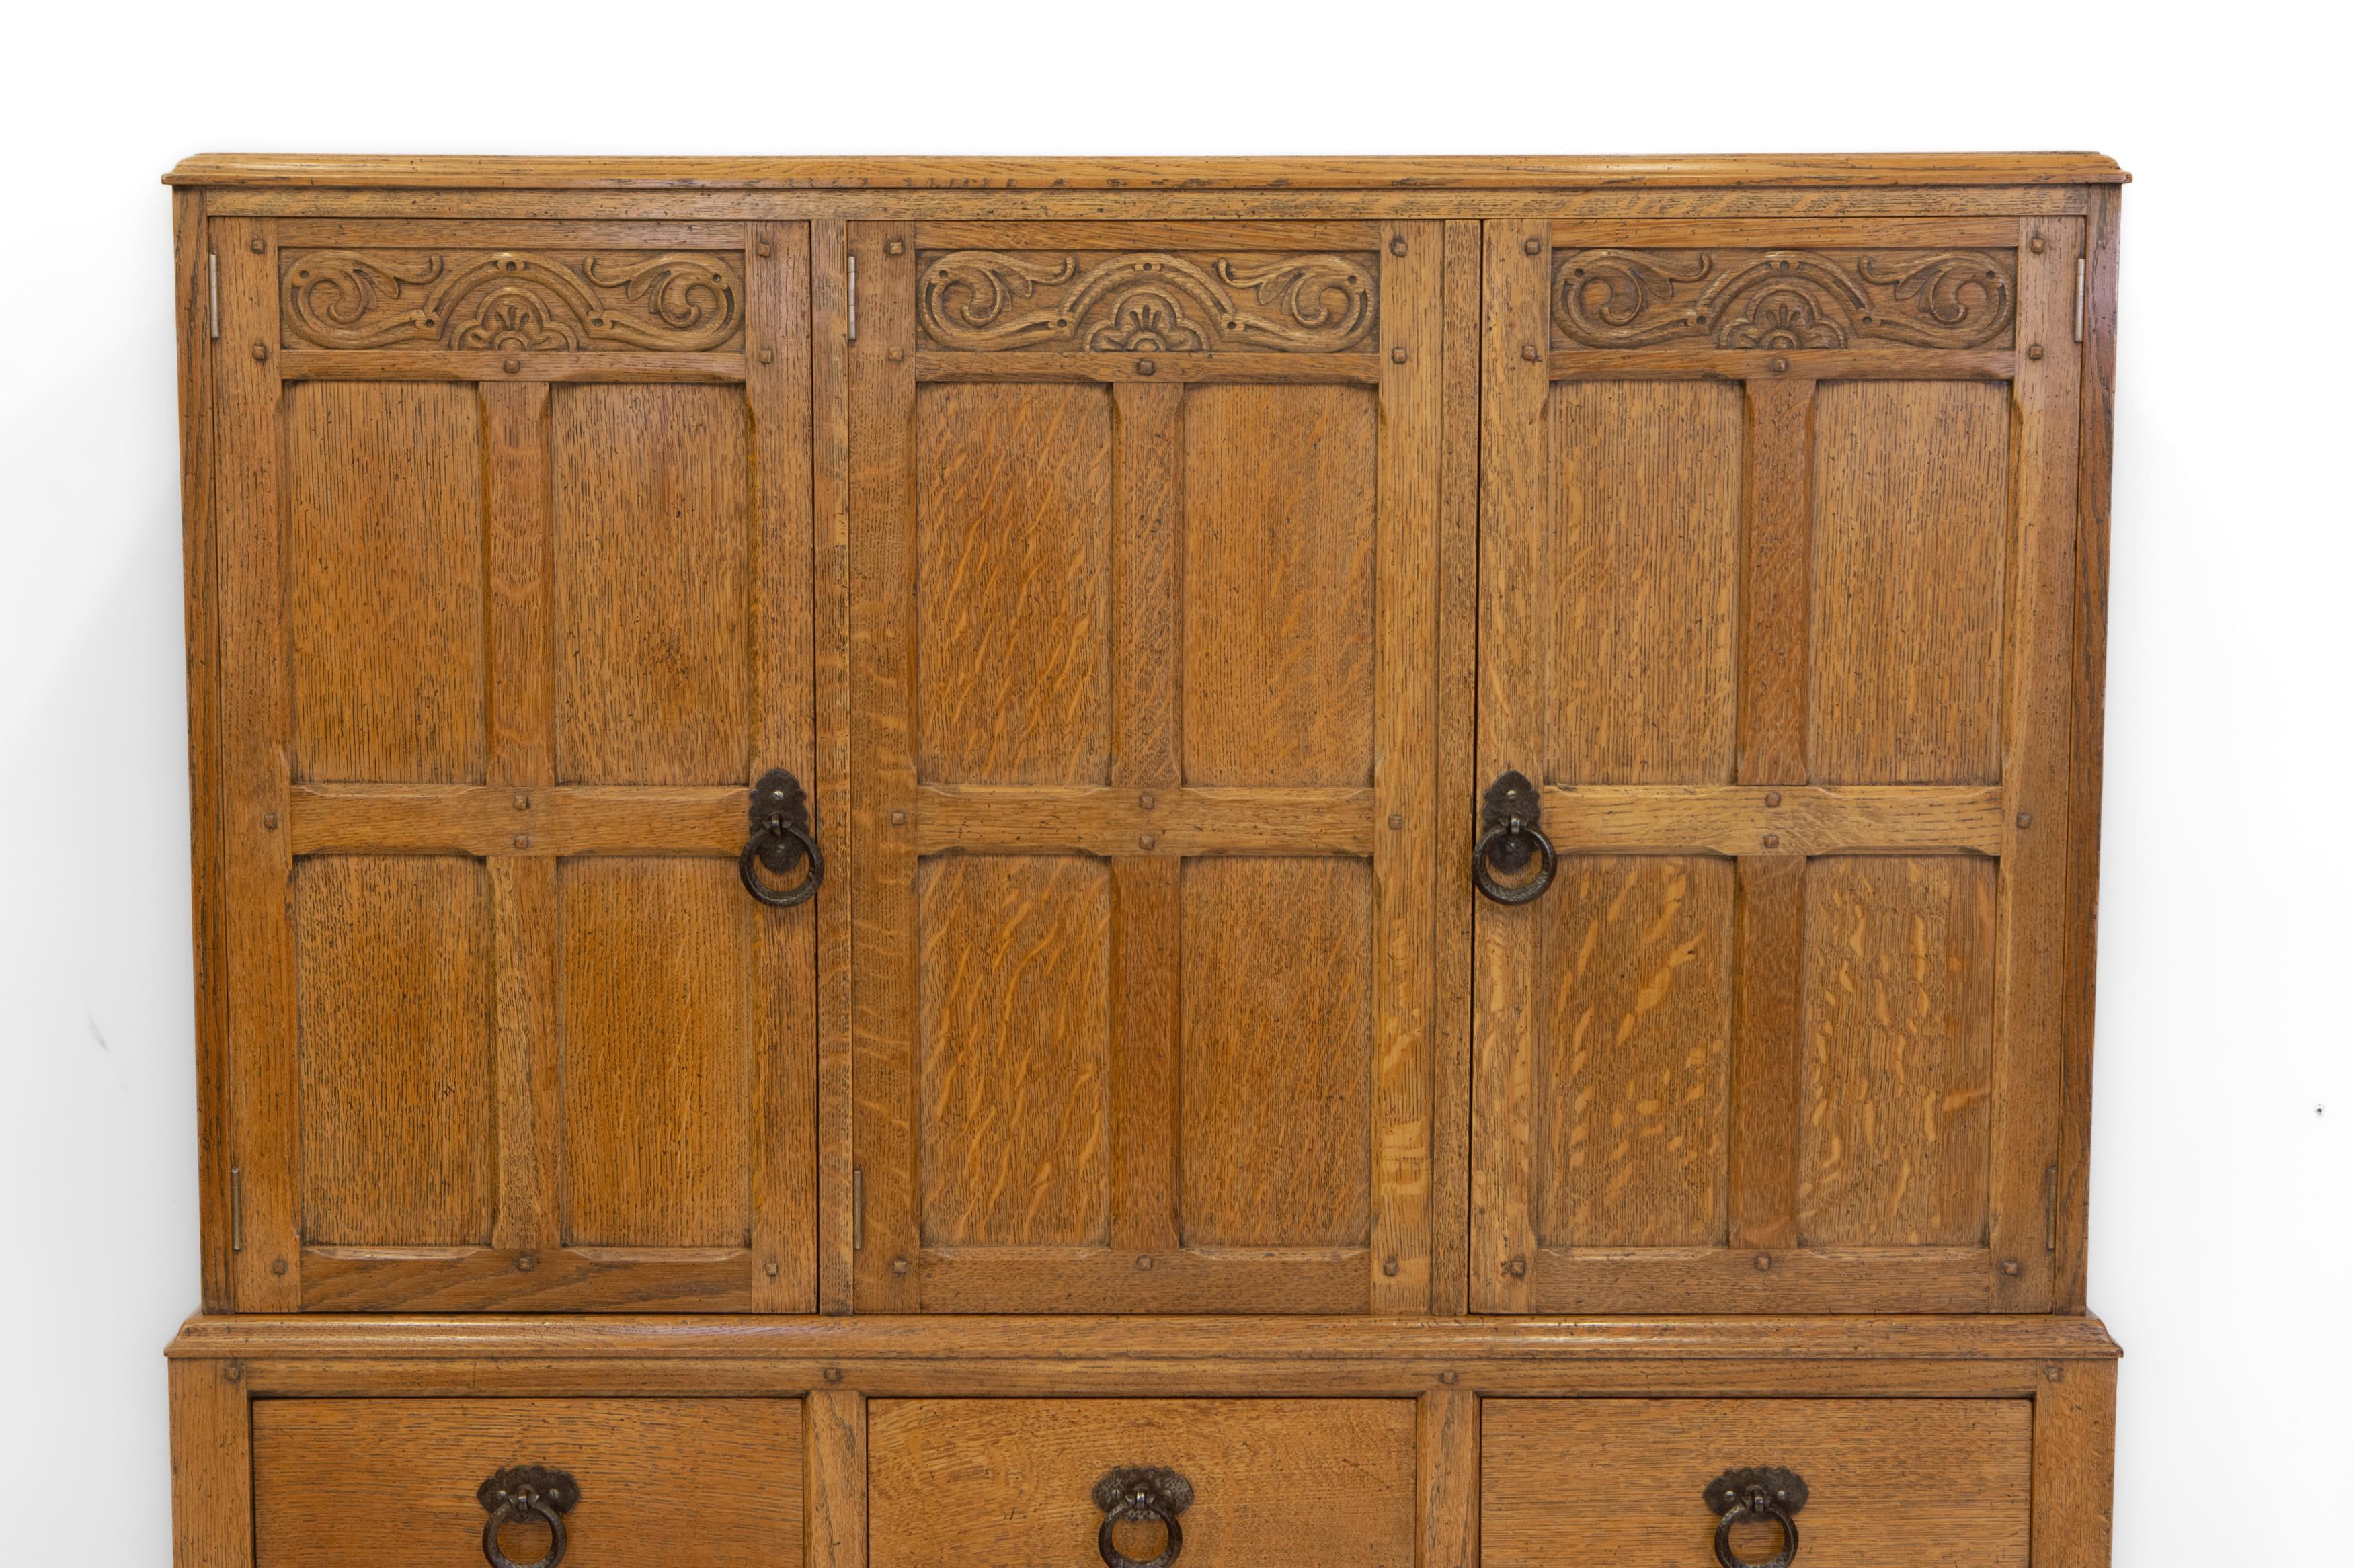 Superb Waring & Gillow oak Arts & Crafts/Cotswold School manner cabinet on stand. Circa 1920. Maker's stamp. 

Excellent quality, made in solid oak with chamfered edge detail to the stand and cupboard doors, and peg construction. Hand hammered